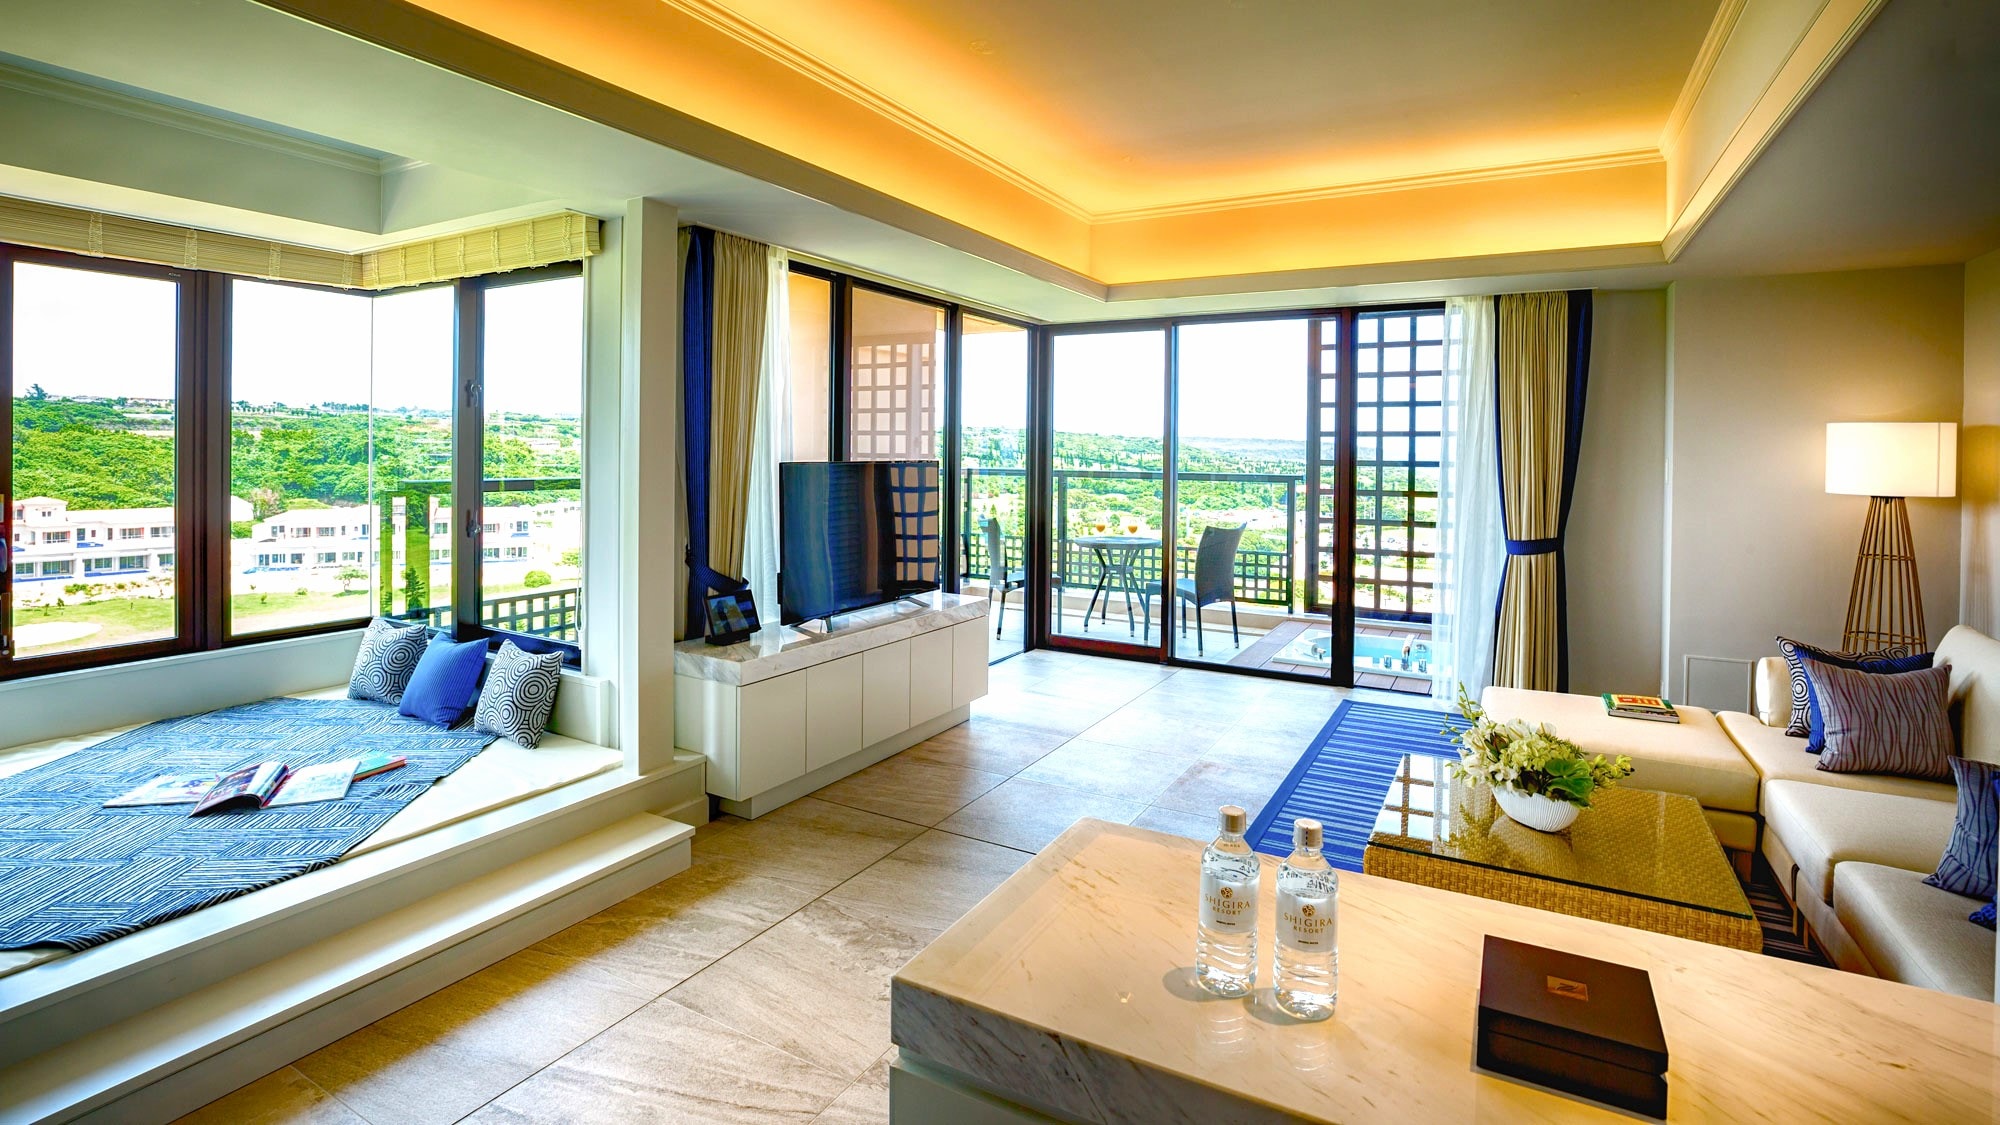 [Bayside/Junior Suite] A suite room of about 67 m2 overlooking the resort located on the middle floor.